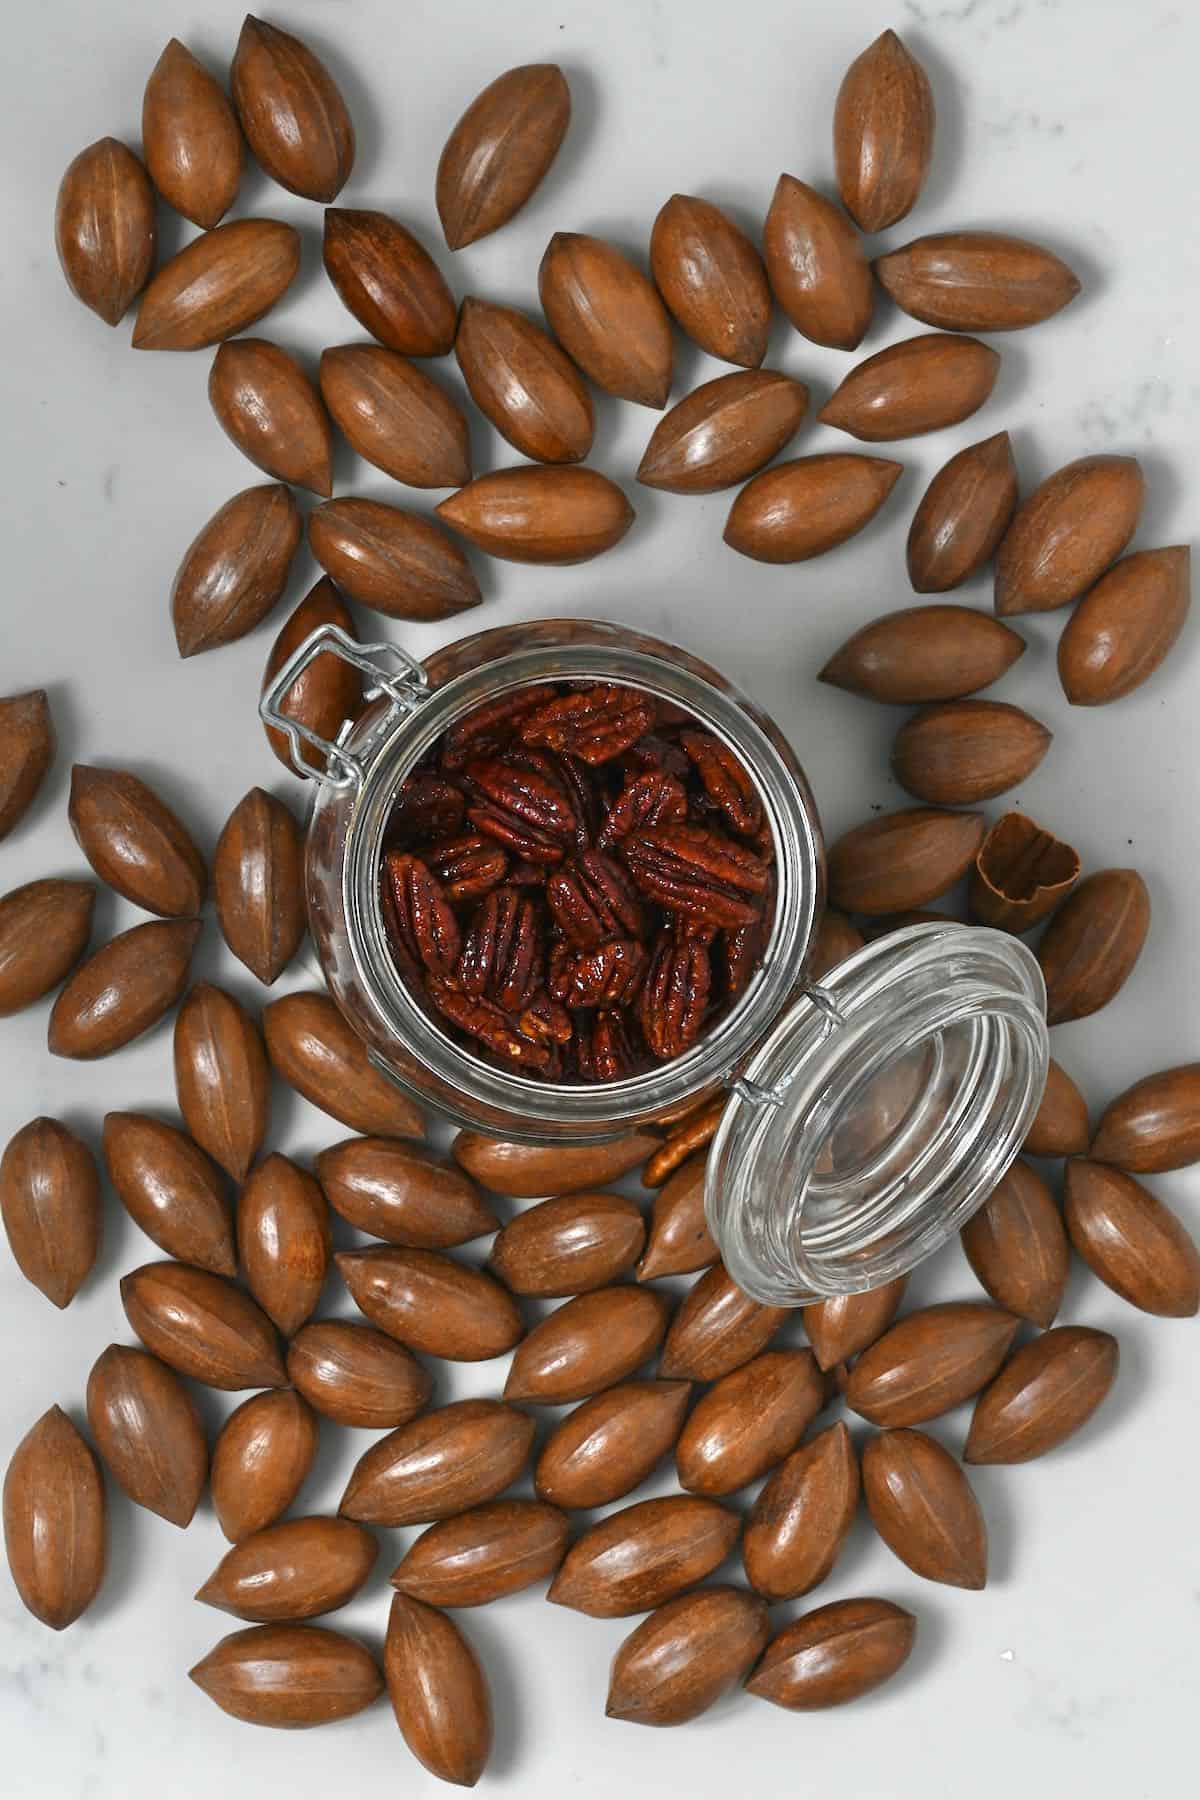 A jar with candied pecans